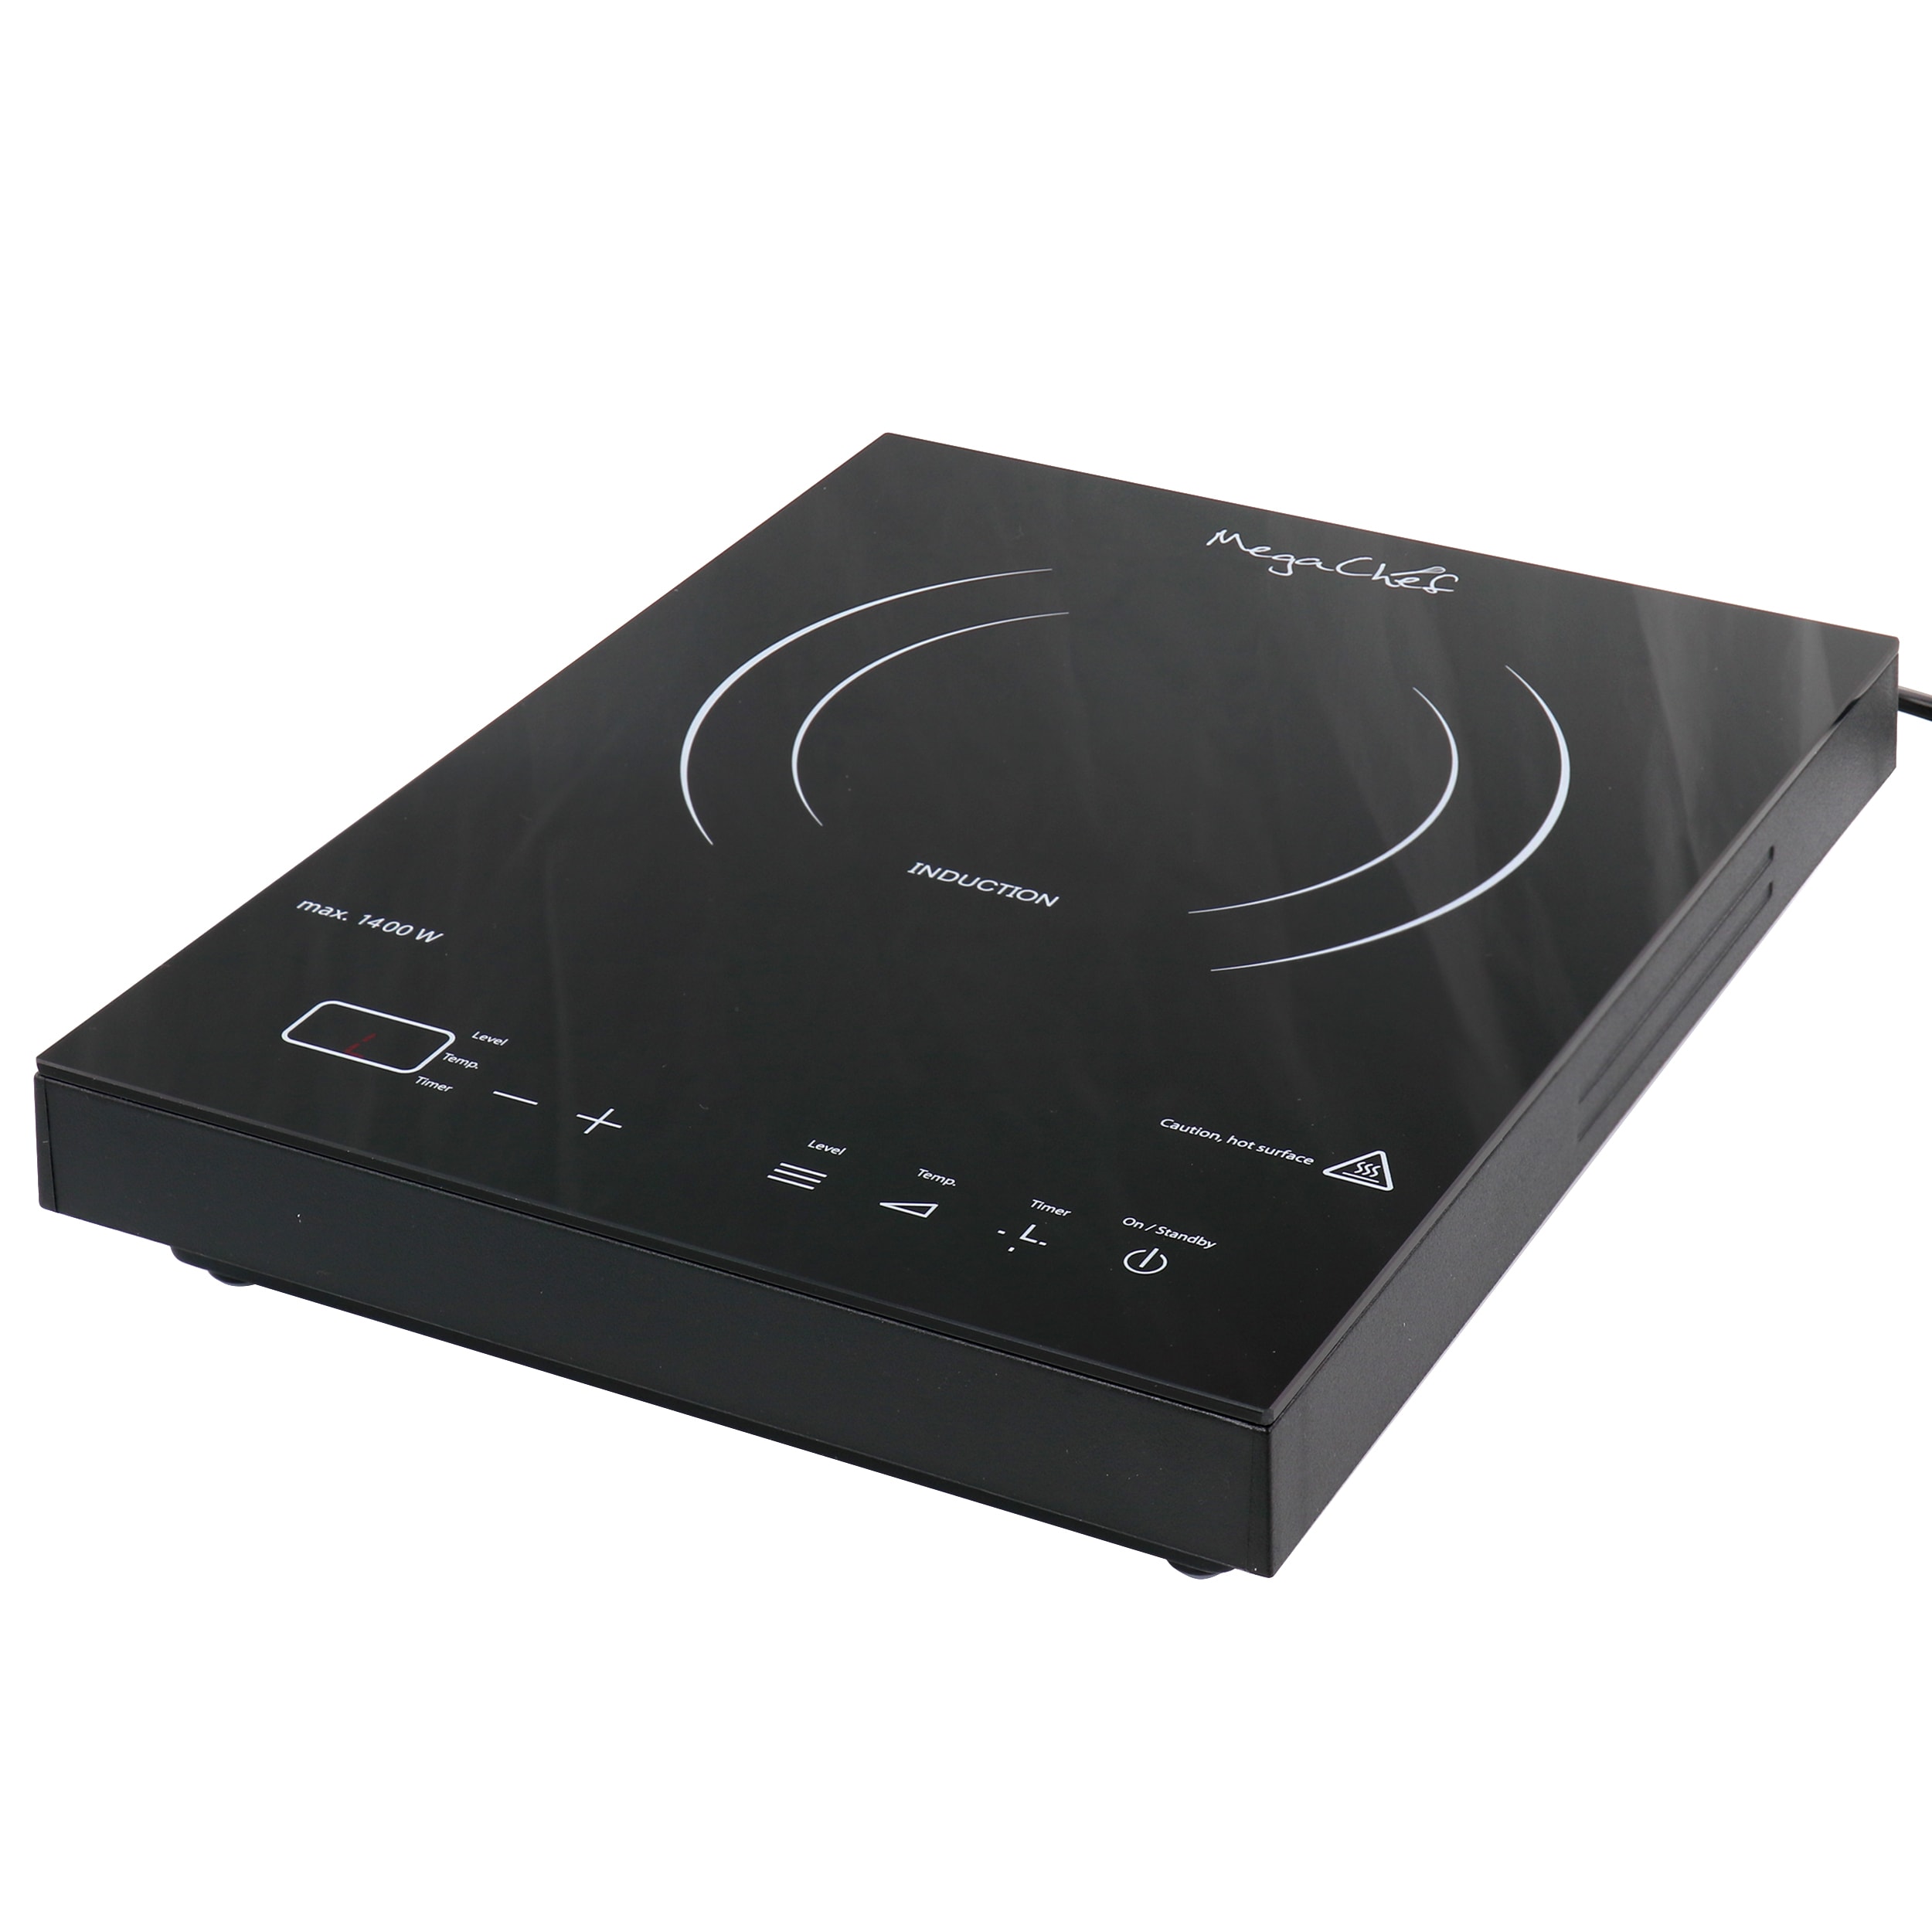 Megachef Infrared Dual Cook Top Electric Burner 975111970M, Color: Black -  JCPenney